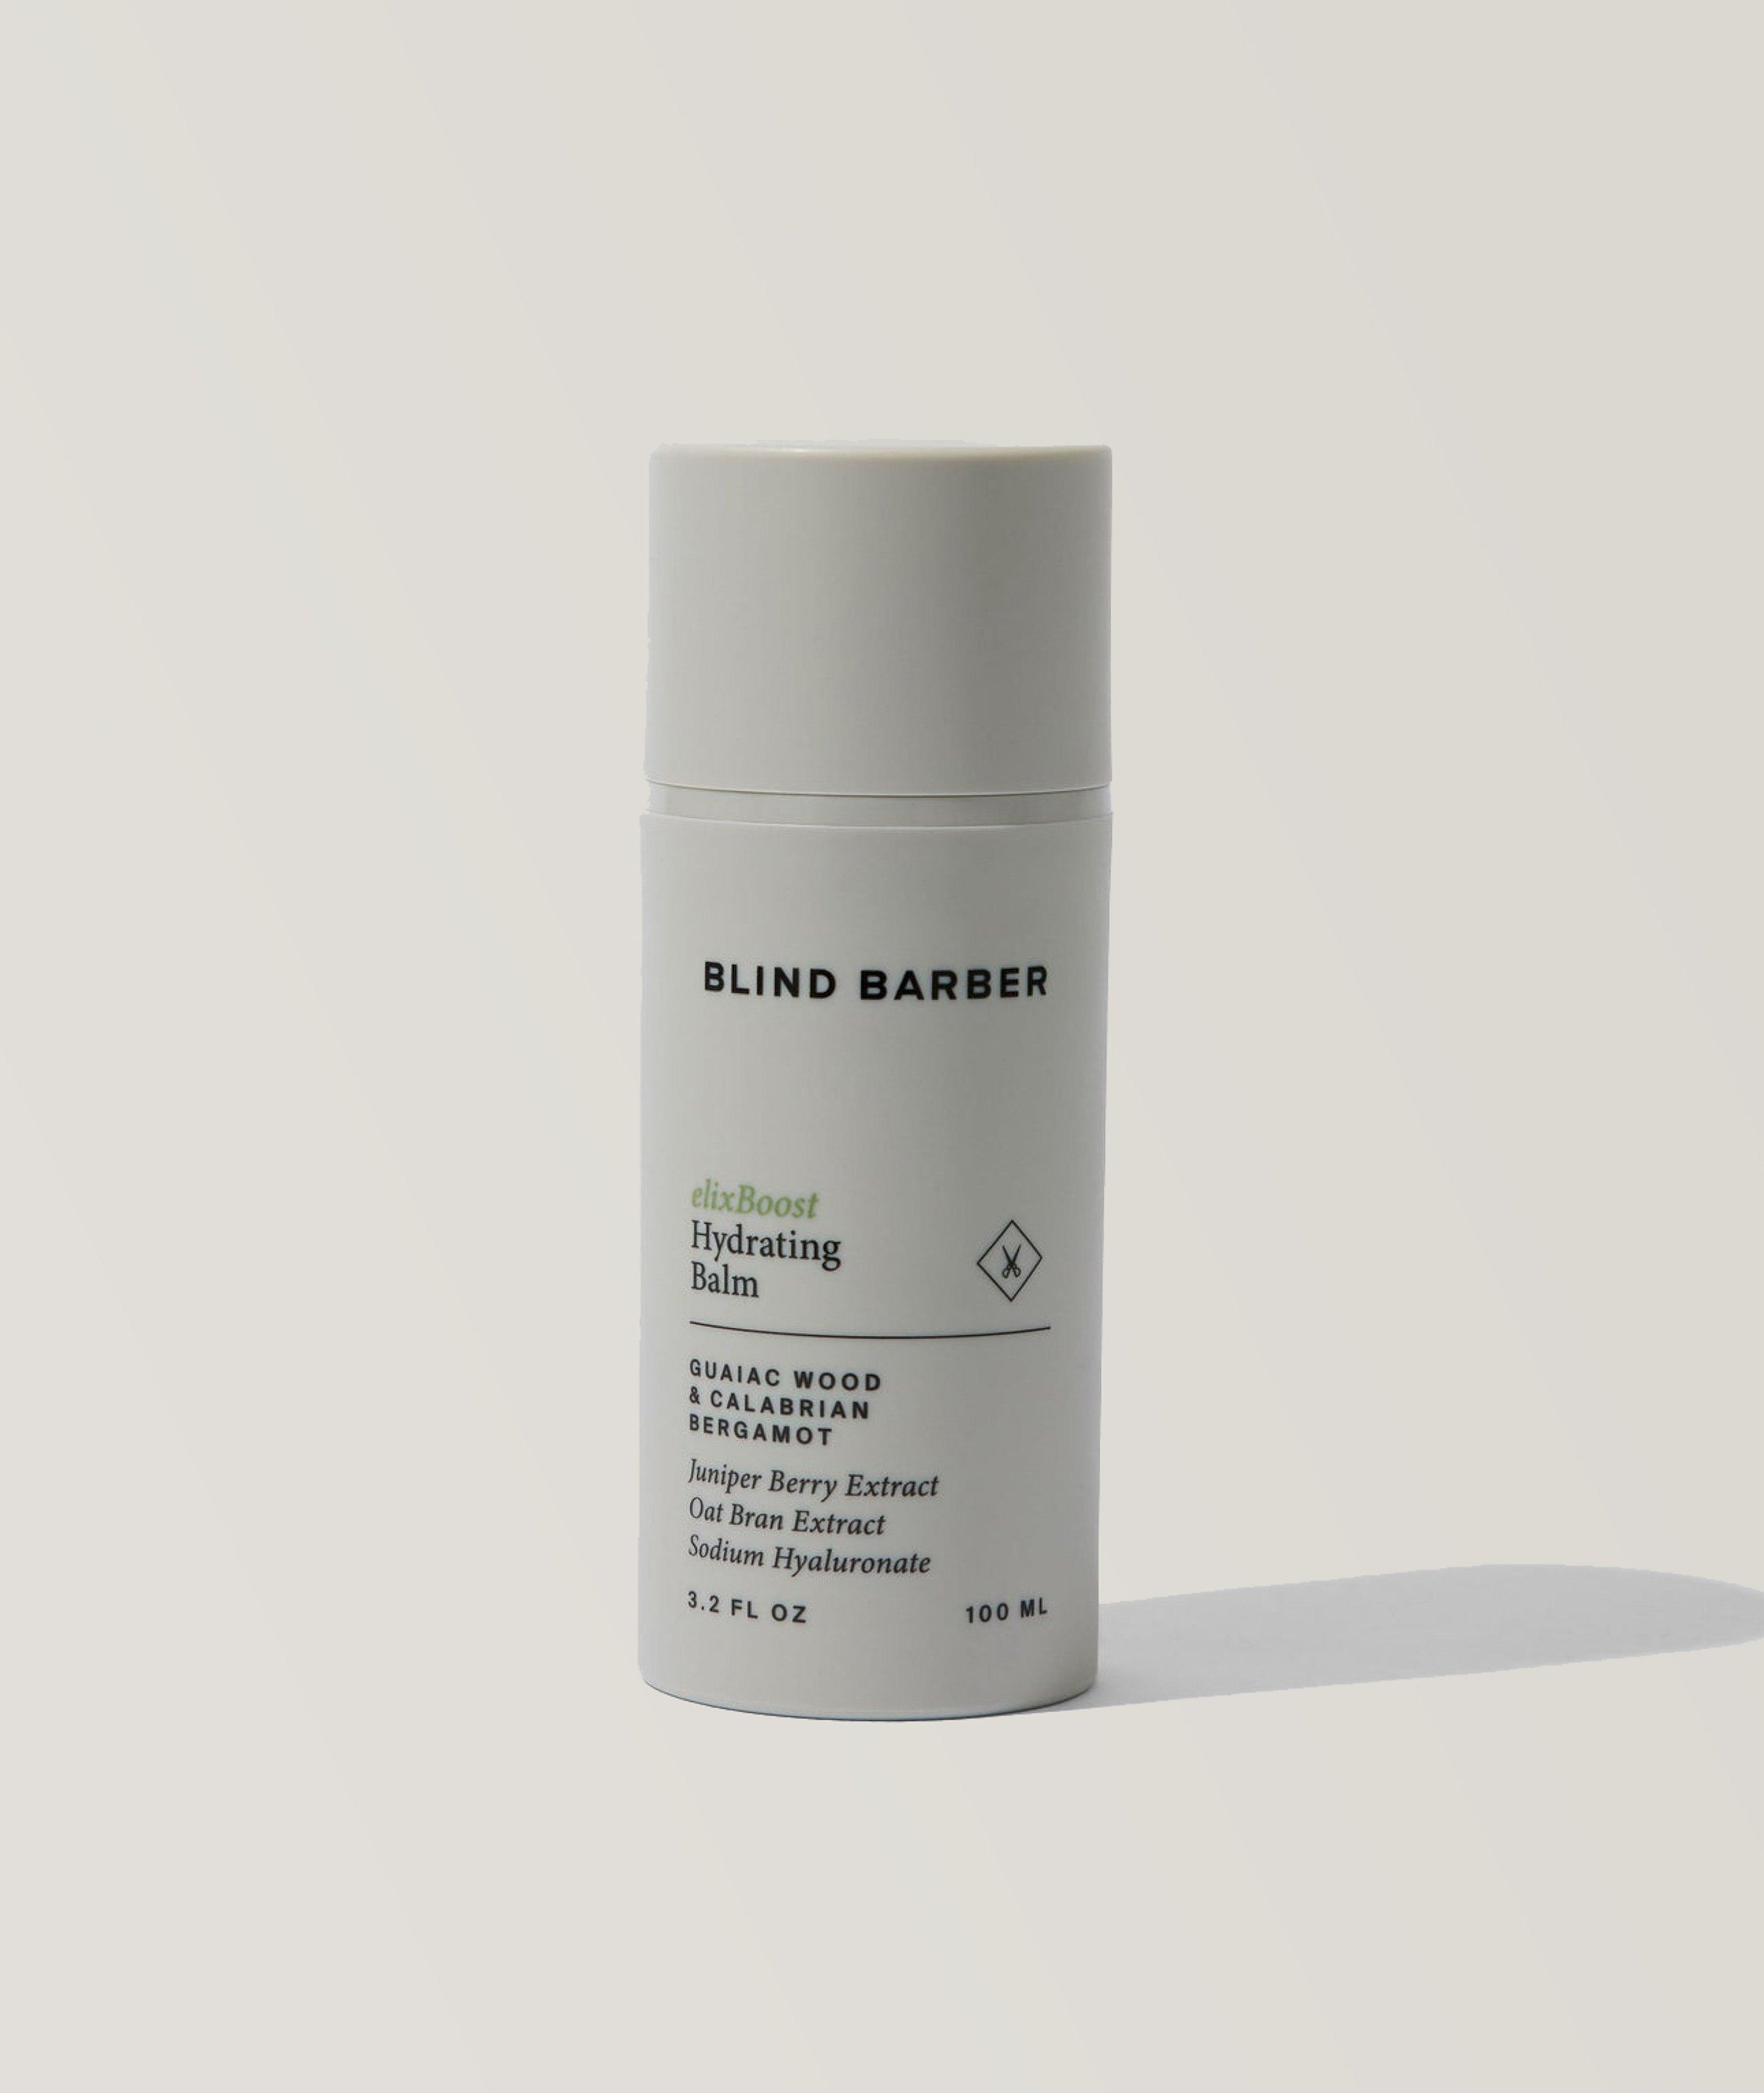 Blind Barber elixBoost Hydrating Face Balm 100ml